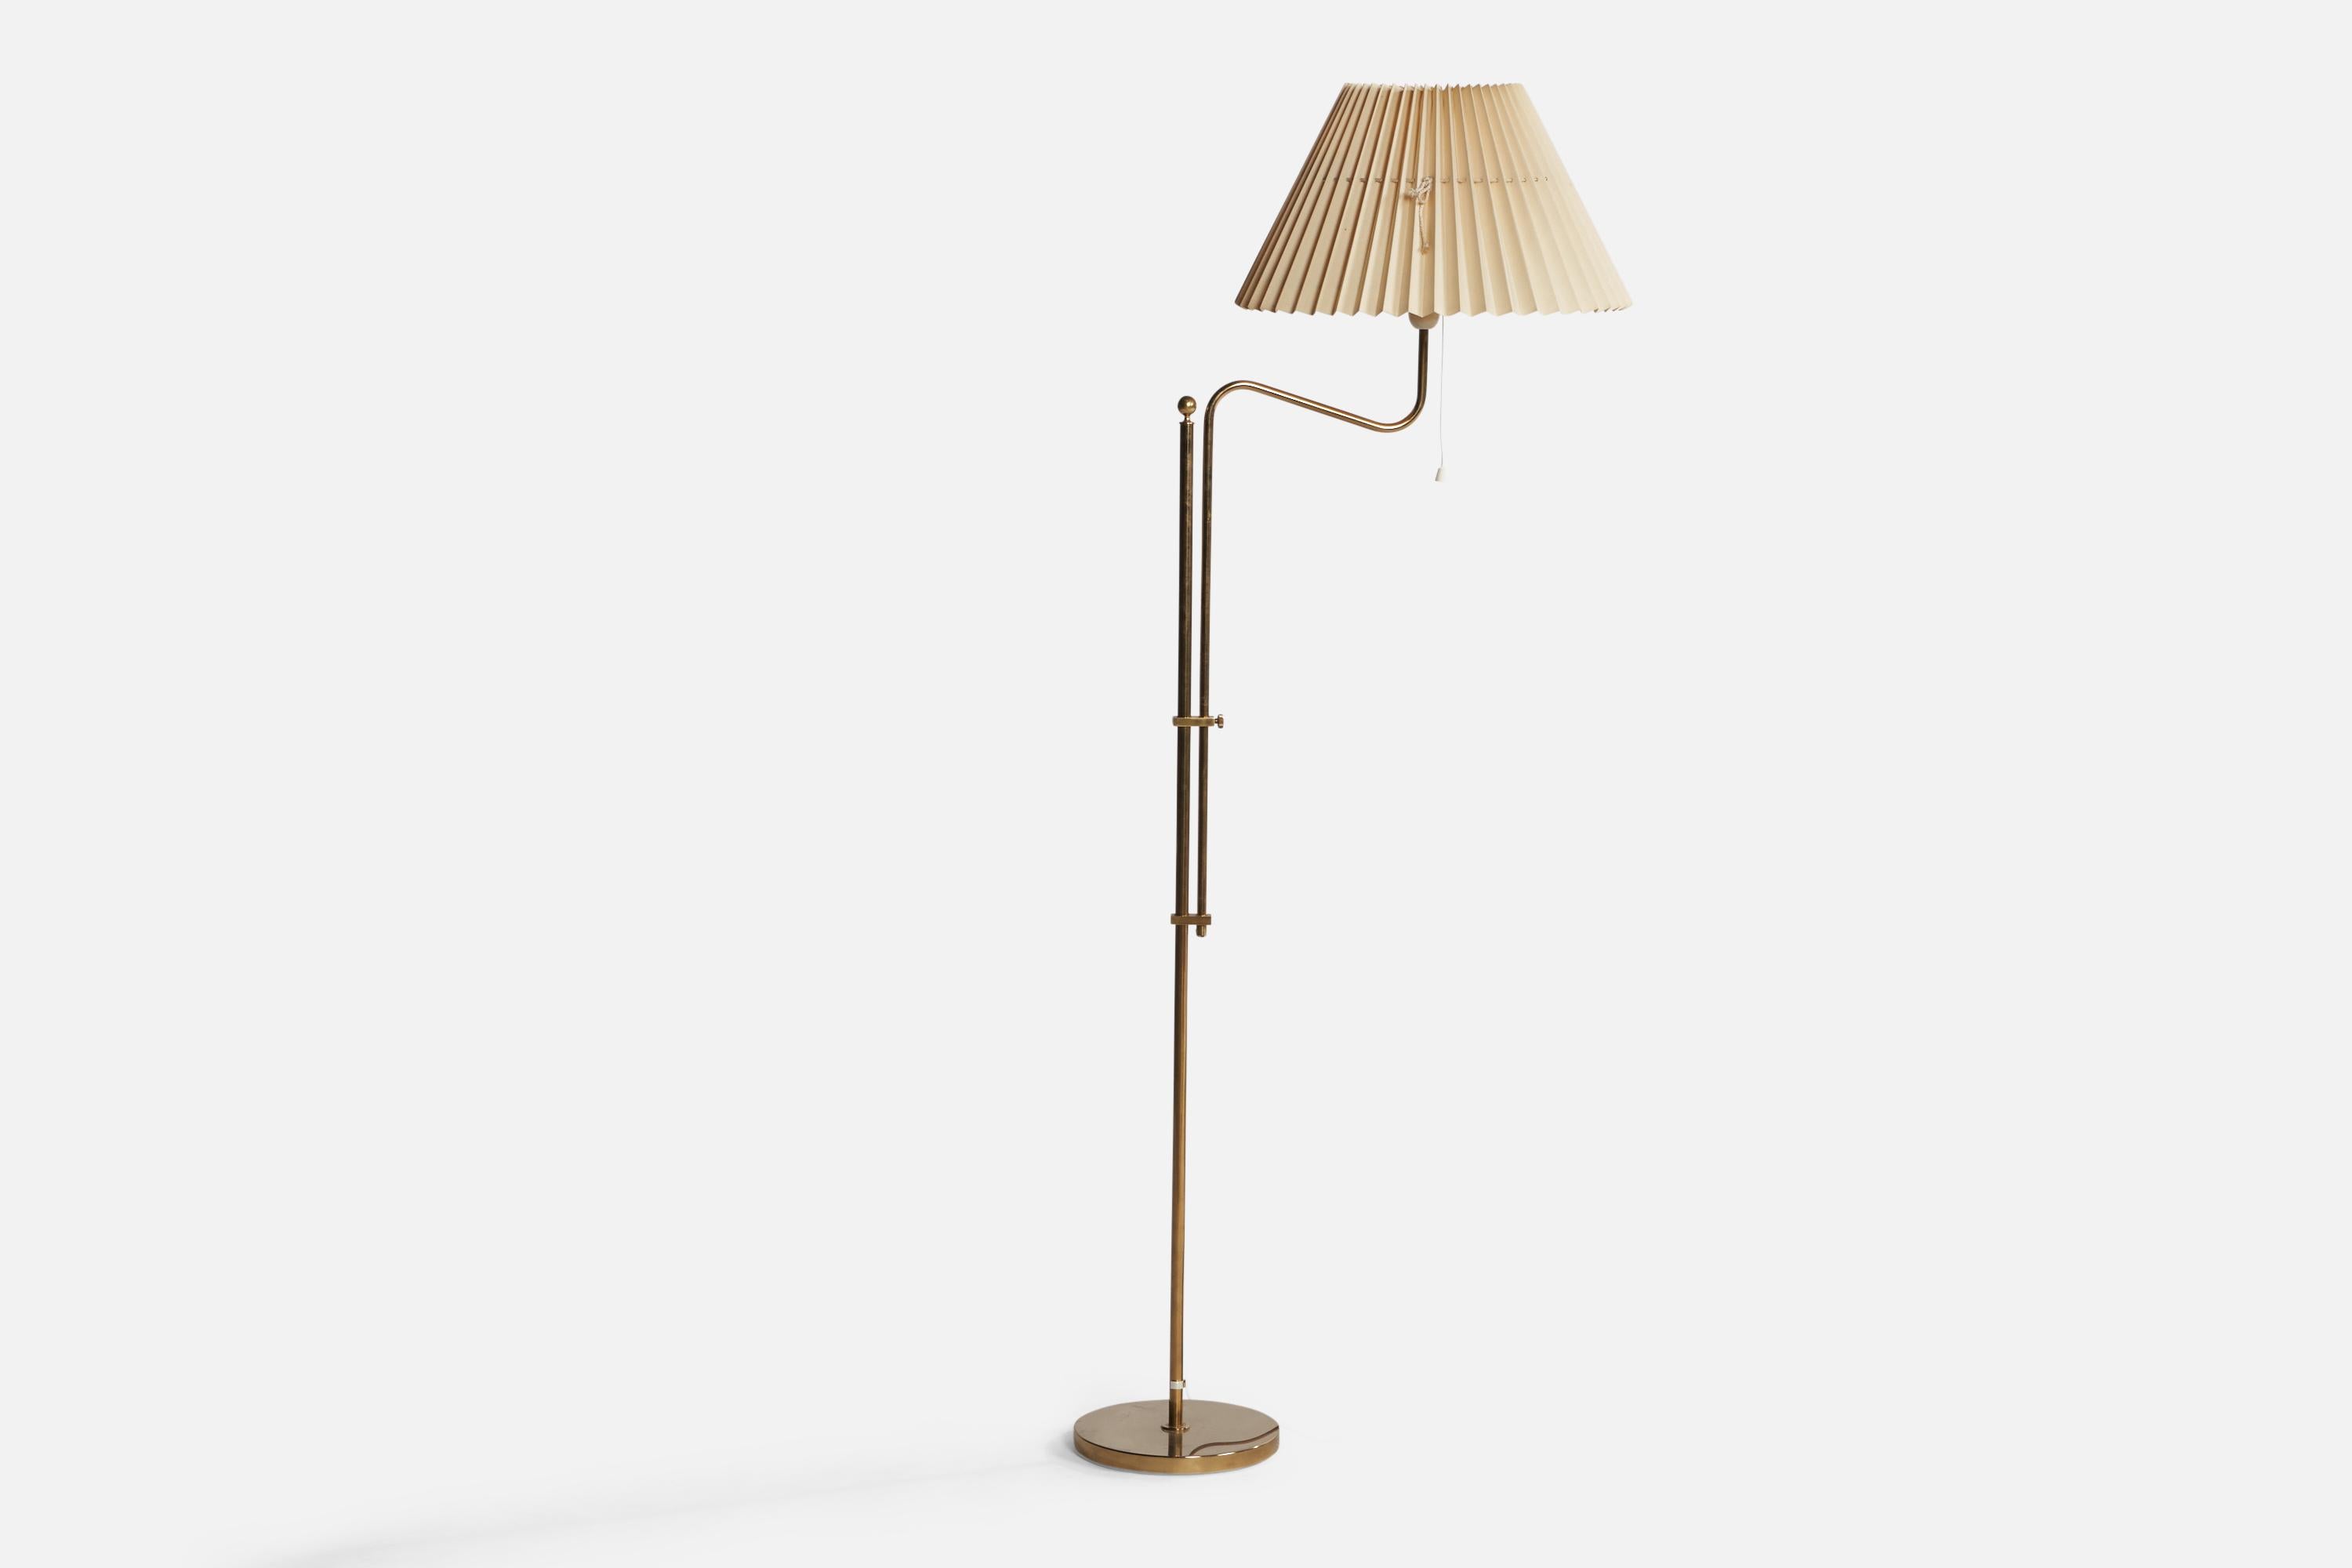 An adjustable brass and beige paper floor lamp designed and produced by Bergboms, Sweden, 1960s.

Overall Dimensions (inches): 59.75” H x 17” W x 22” D. Stated dimensions include shade.
Height is adjustable,
Bulb Specifications: E-26 Bulb
Number of